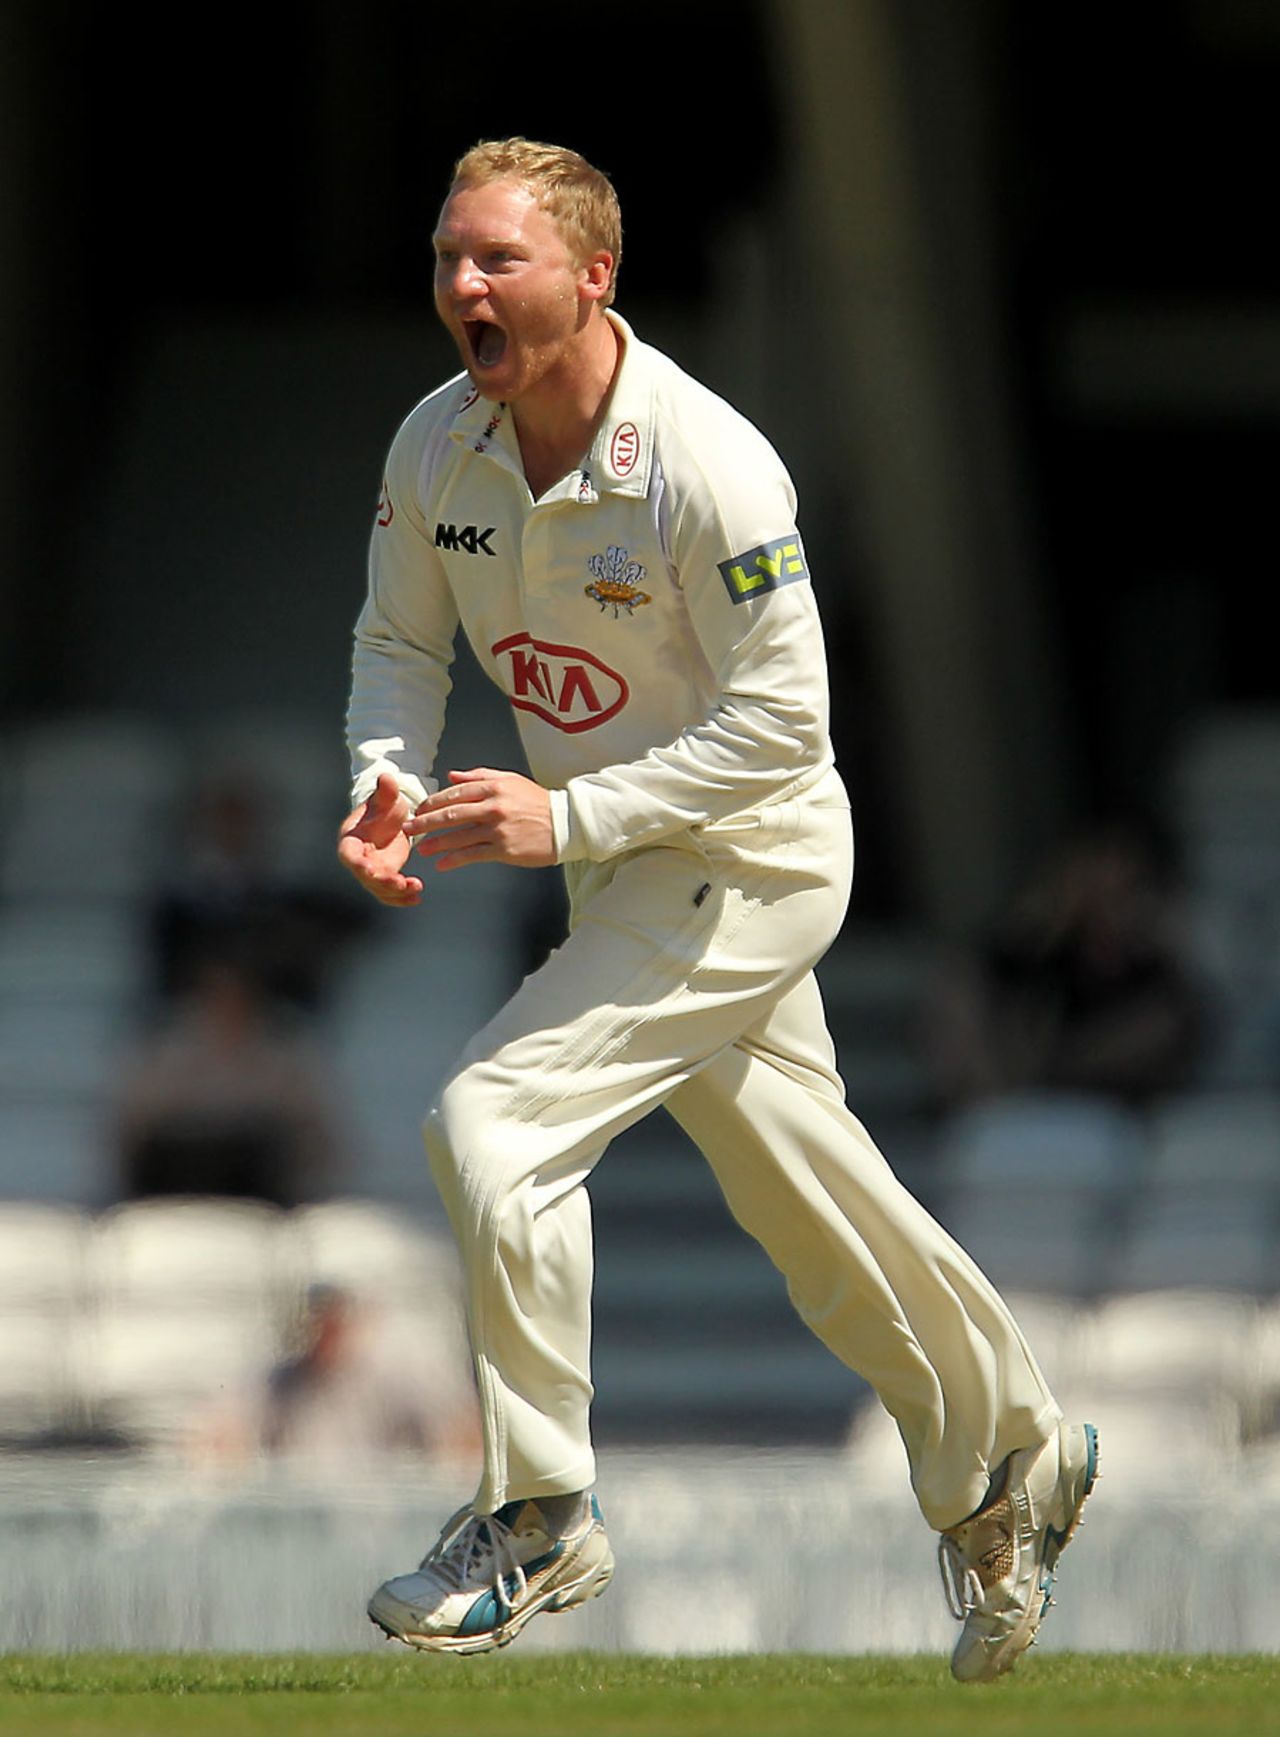 Gareth Batty took his match haul to 10 wickets, Surrey v Warwickshire, County Championship, Division One, The Oval, May 25, 2012